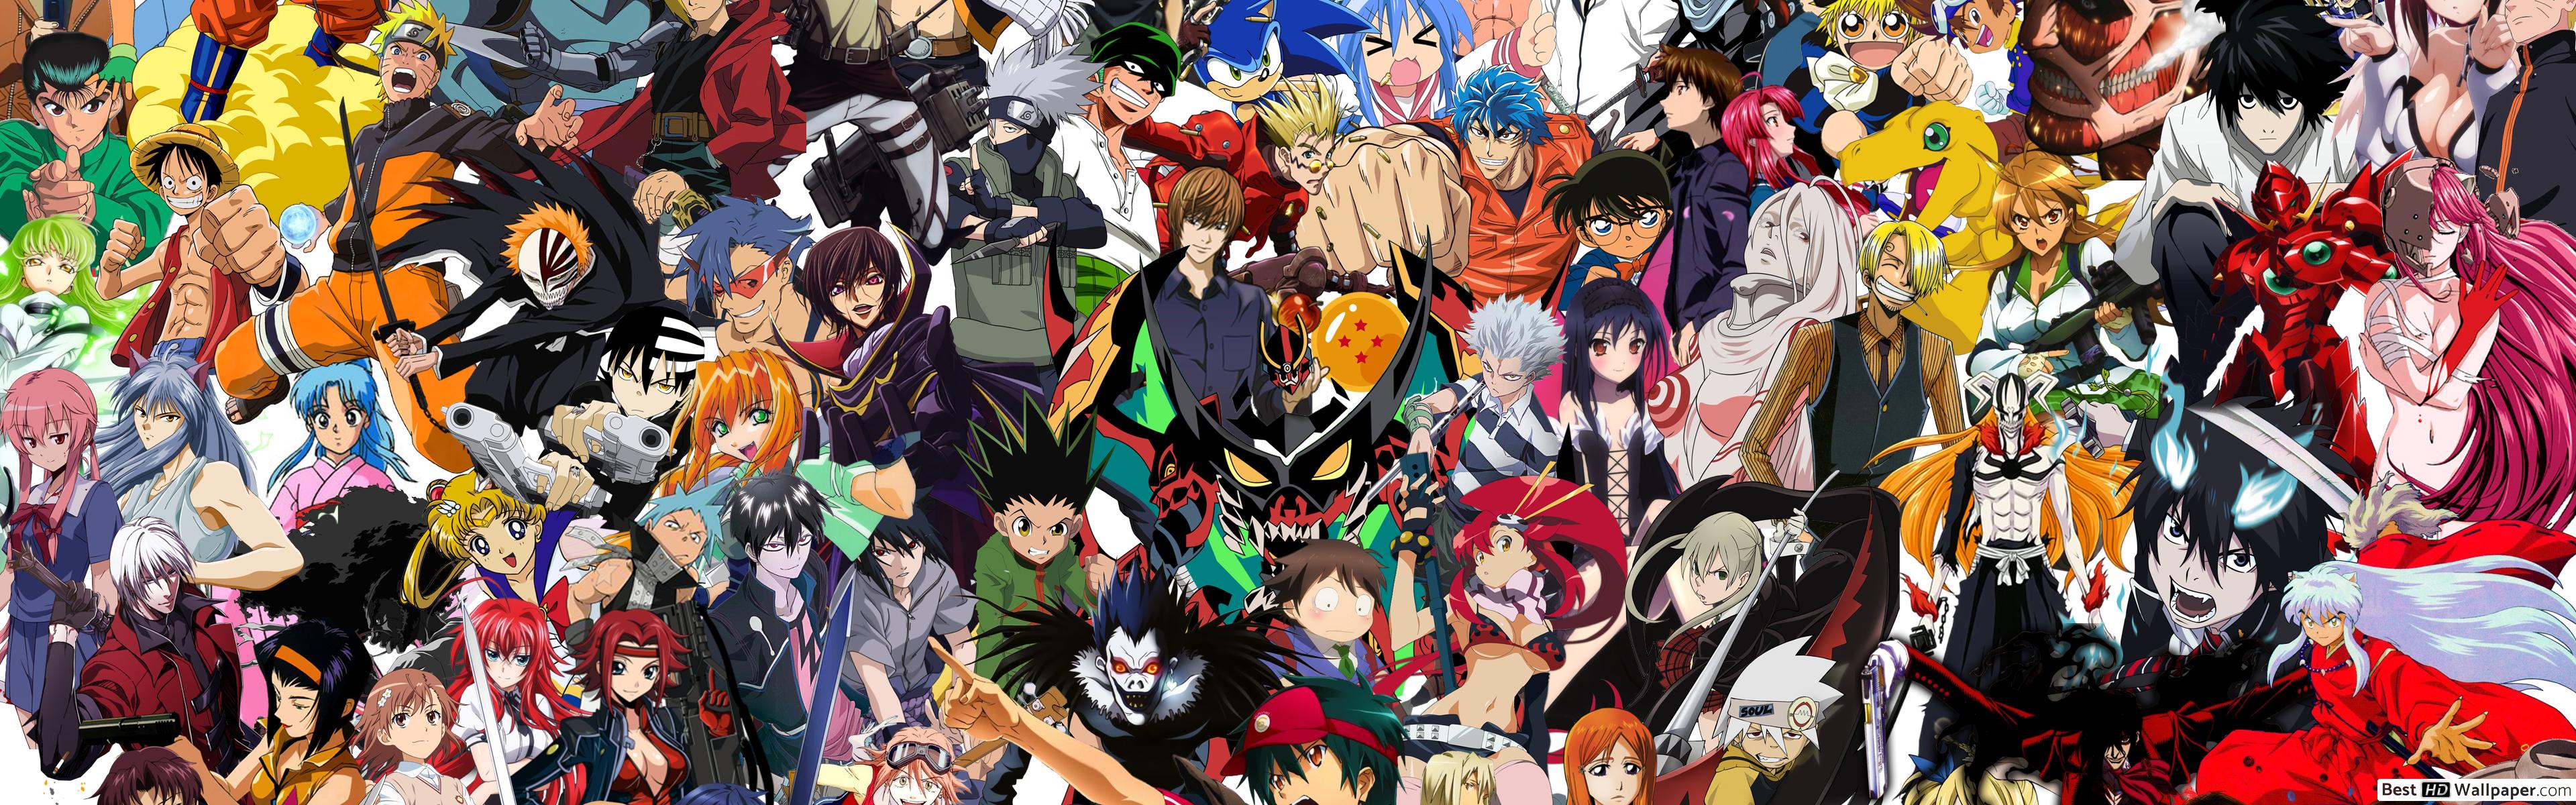 Anime Crossover Poster HD wallpaper download